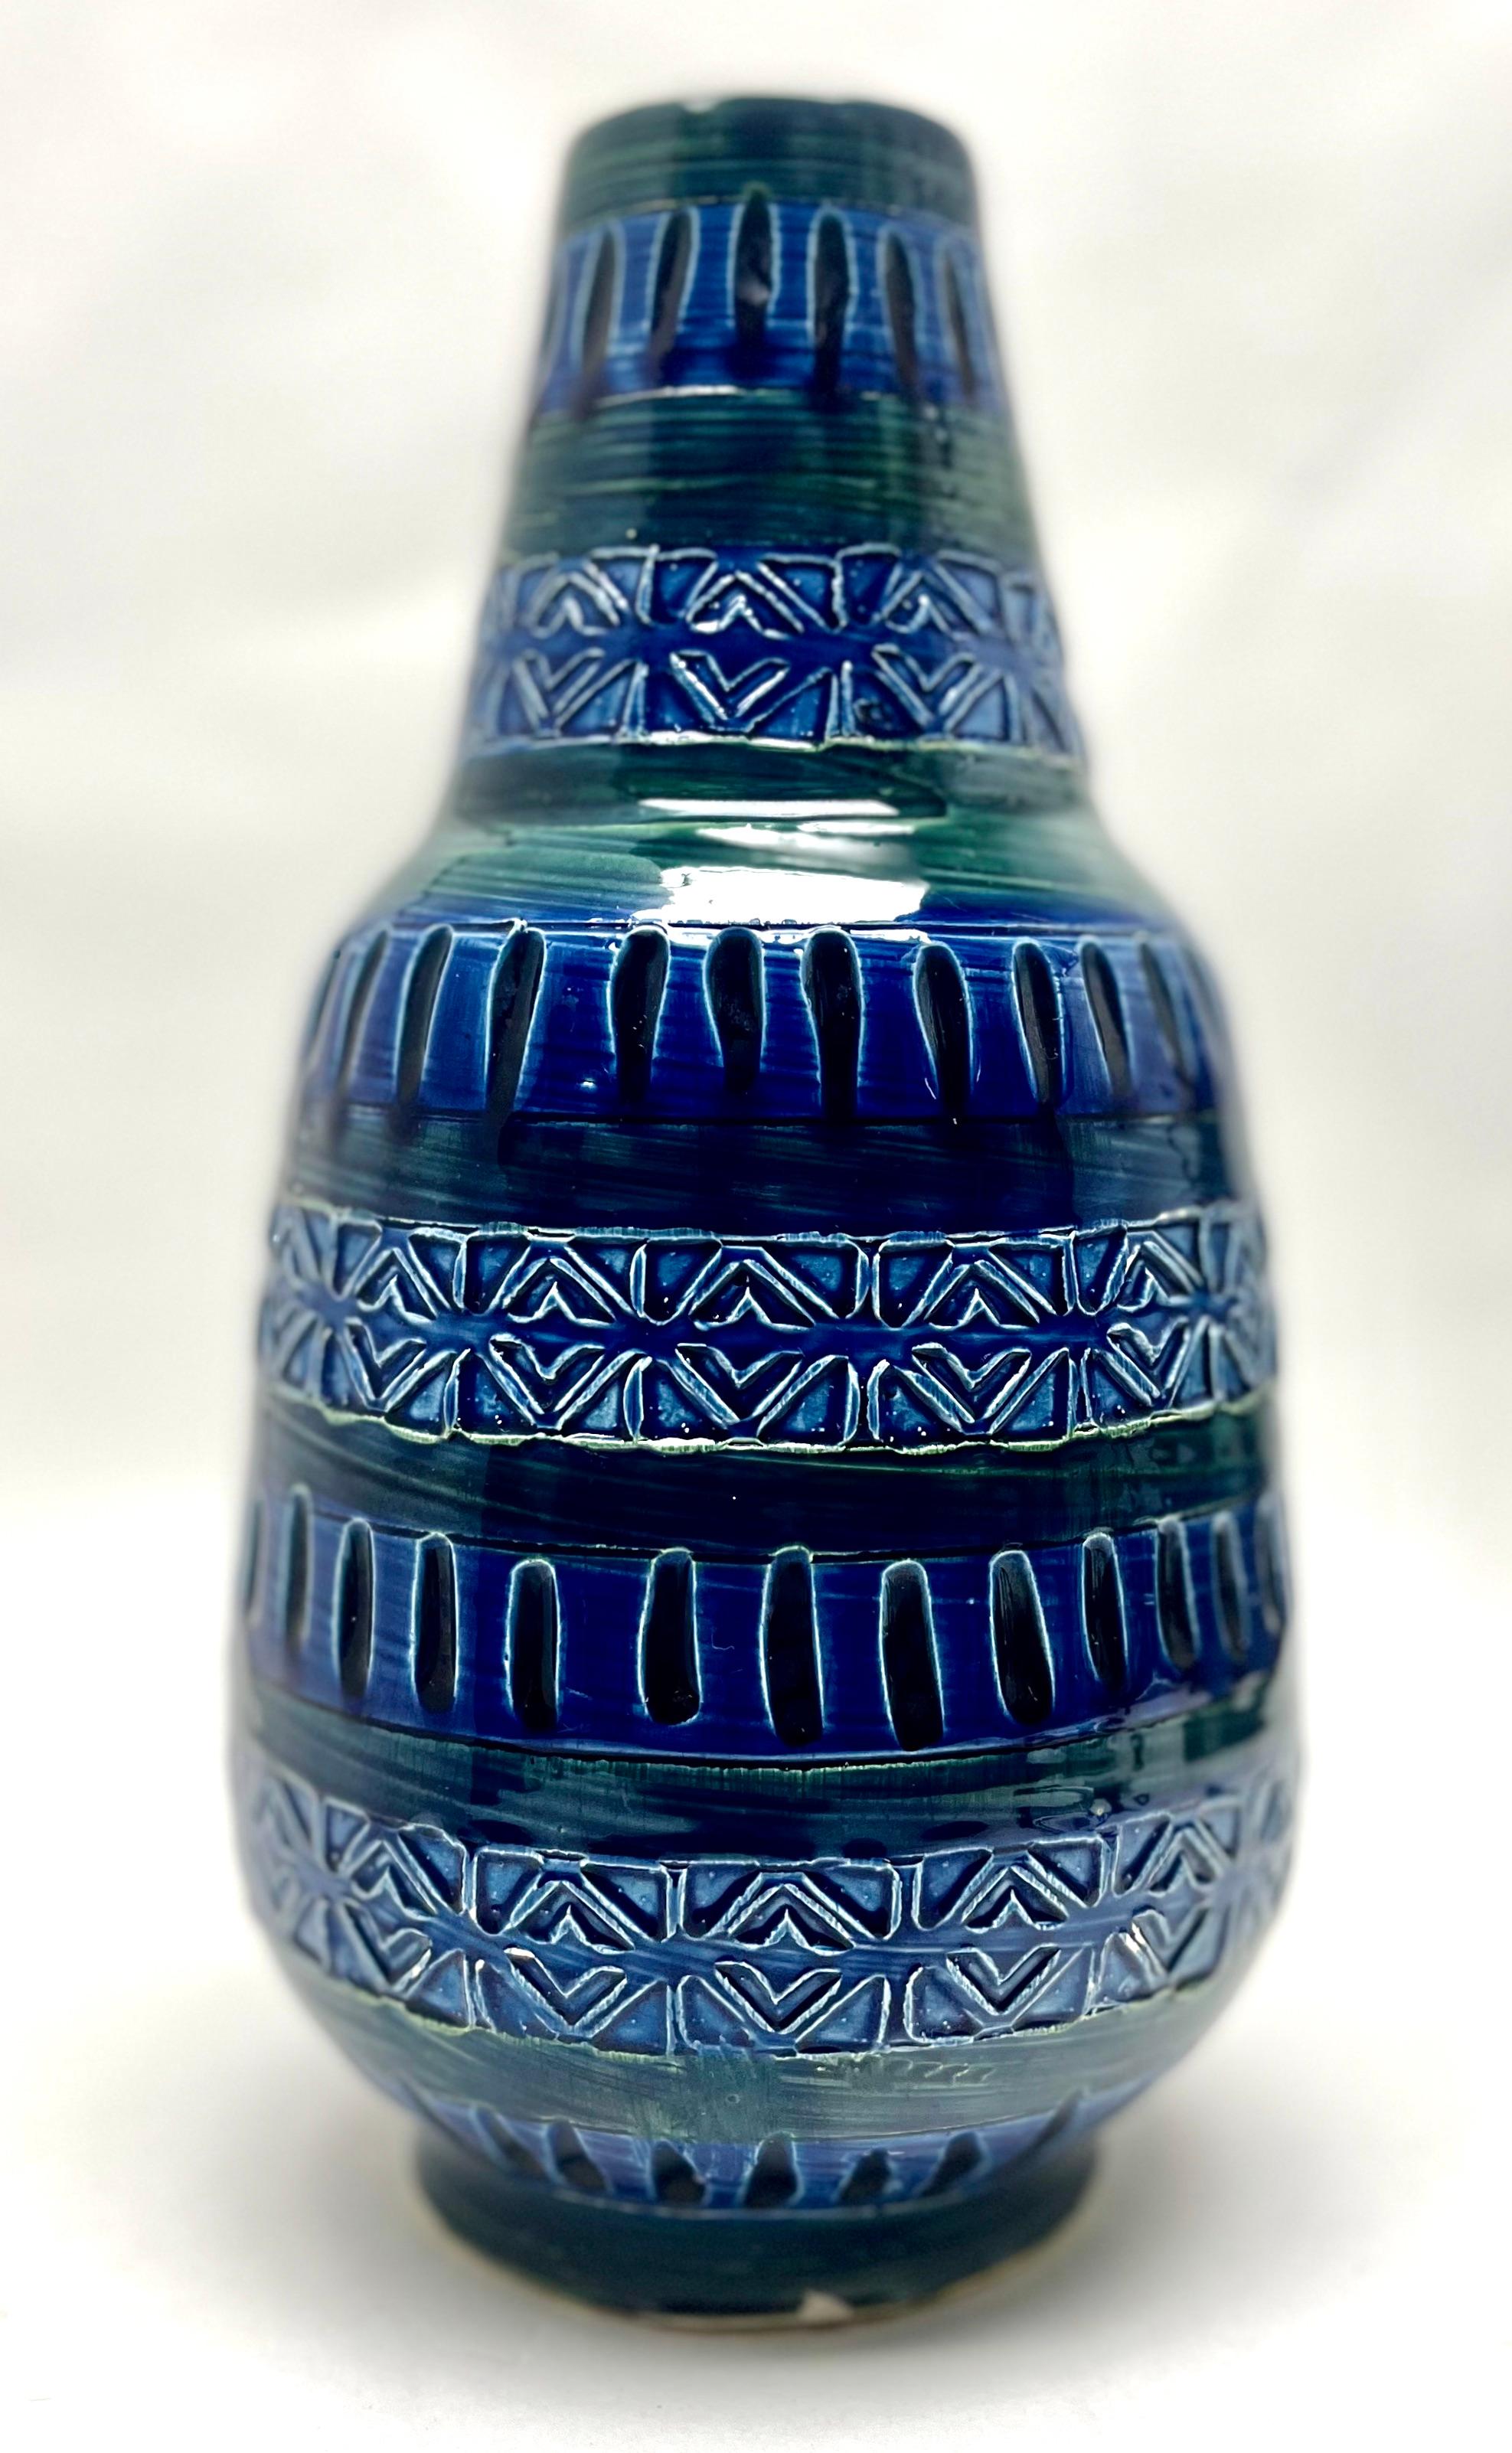 Mid-Century Modern Style of Bitossi Vintage Vase in Blue and Green Glaze Germany, 1970s For Sale